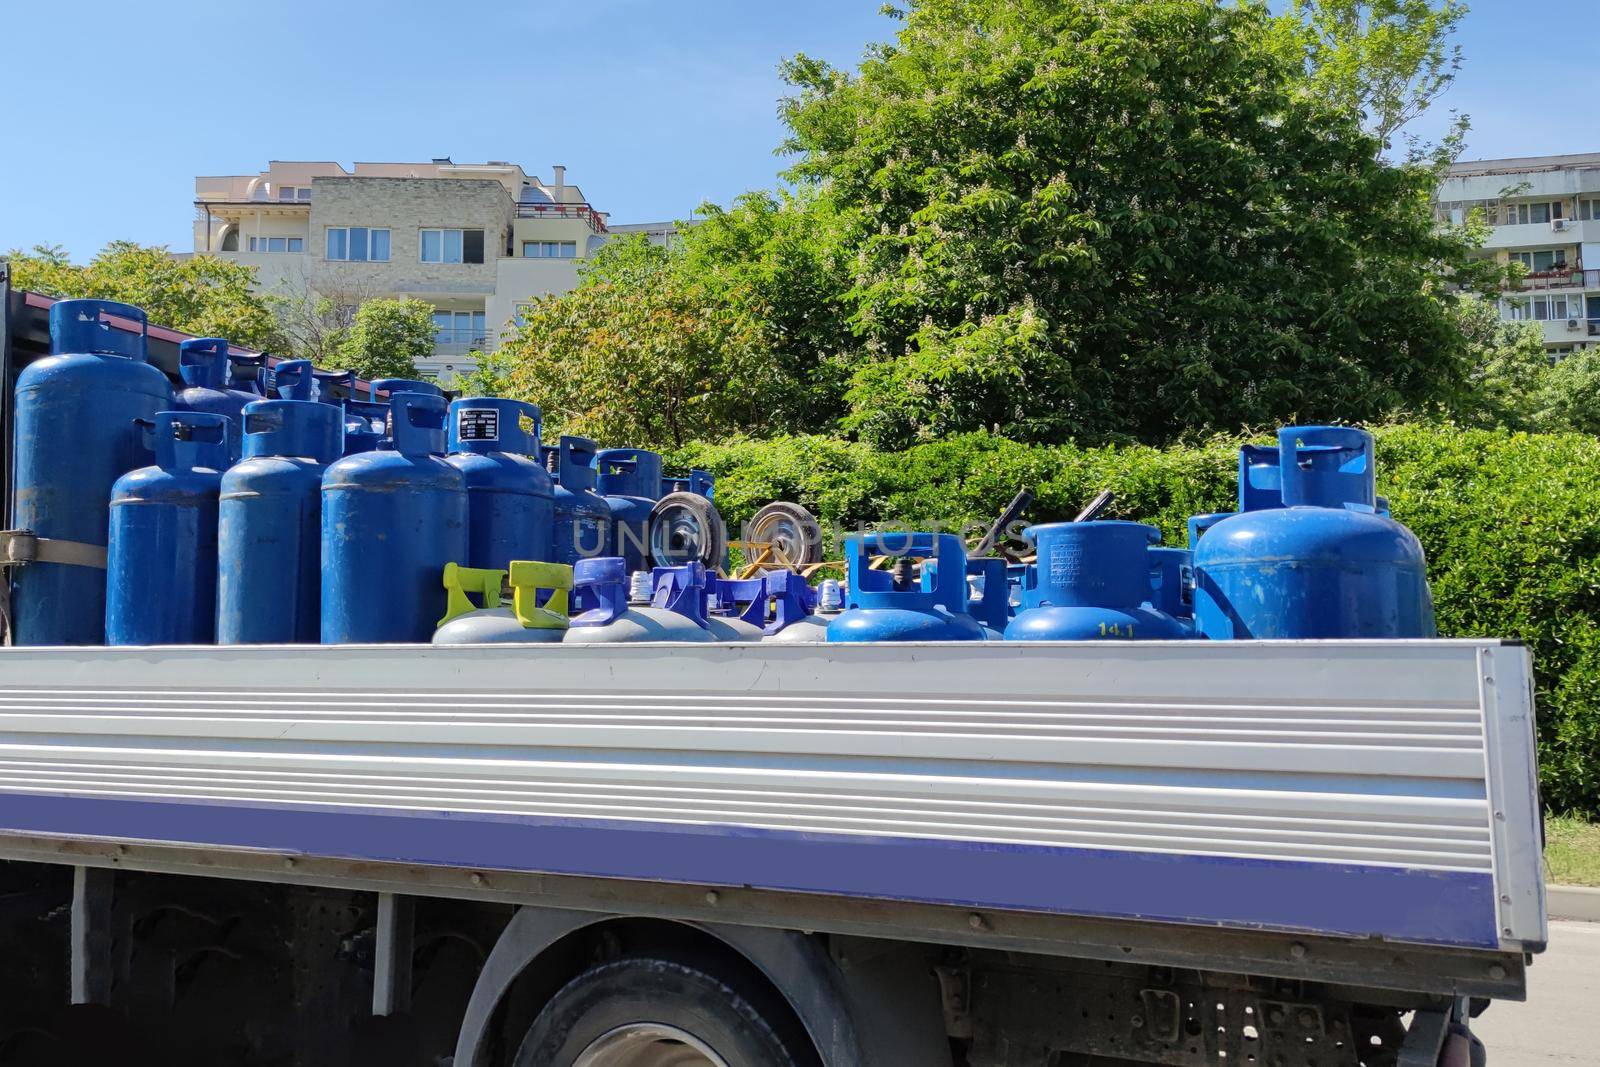 truck carries blue gas cylinders in an open body close up